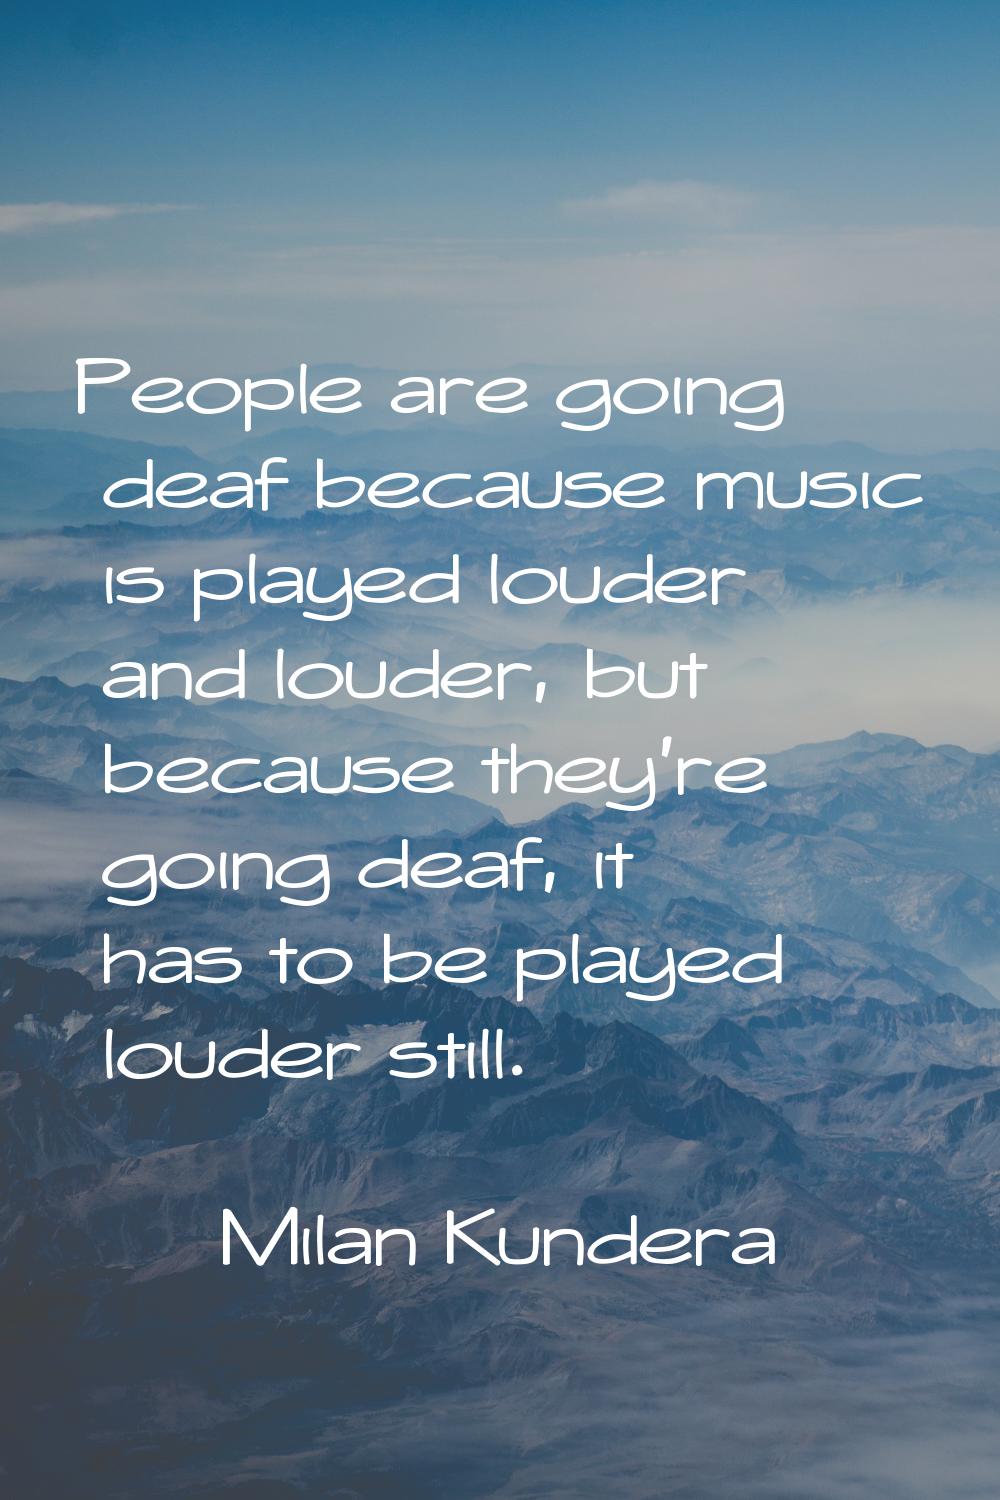 People are going deaf because music is played louder and louder, but because they're going deaf, it